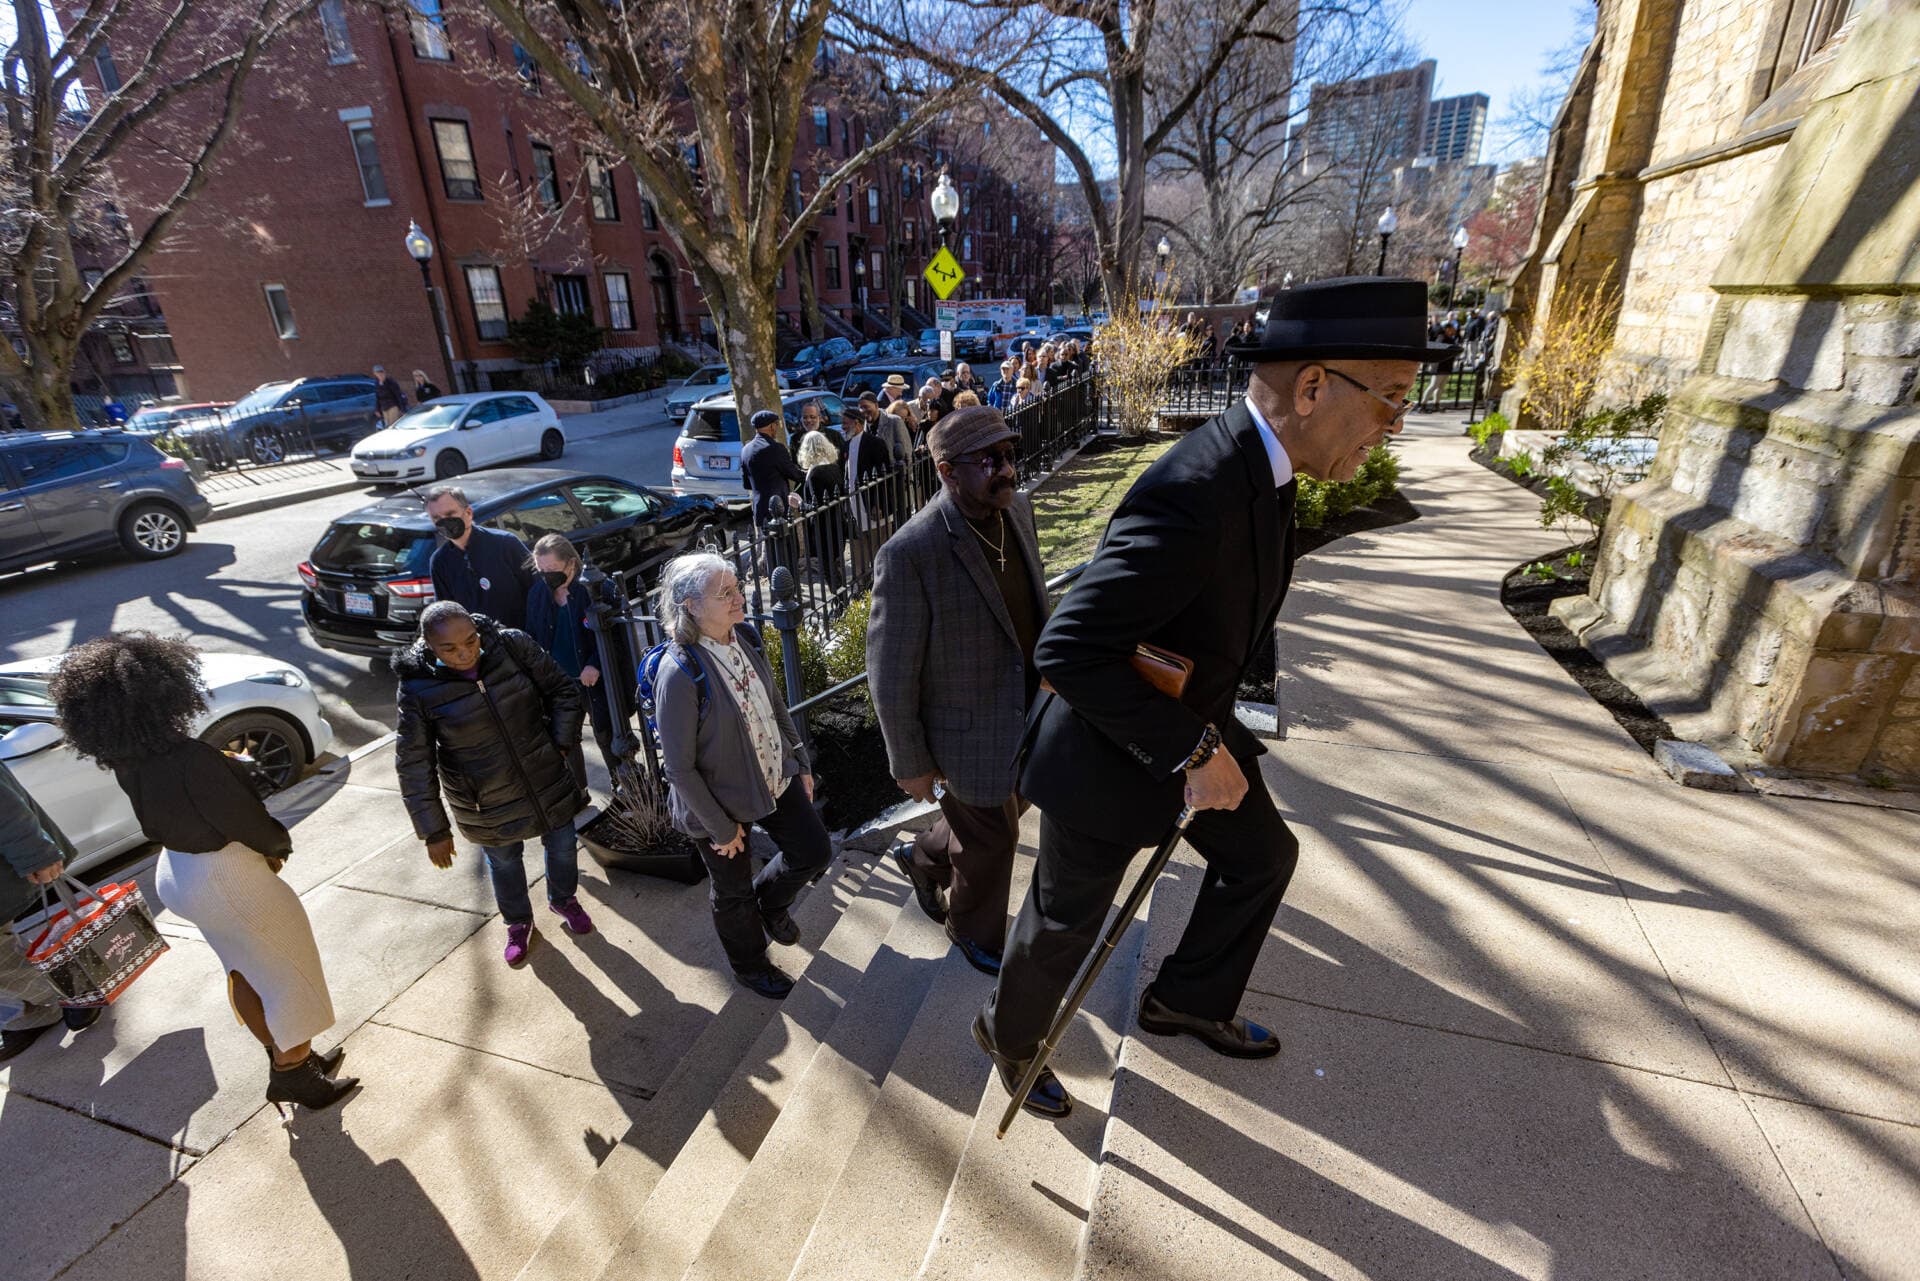 Jose Masso leads a line of people into the Union United Methodist Church in the South End for the public viewing of Mel King. (Jesse Costa/WBUR)